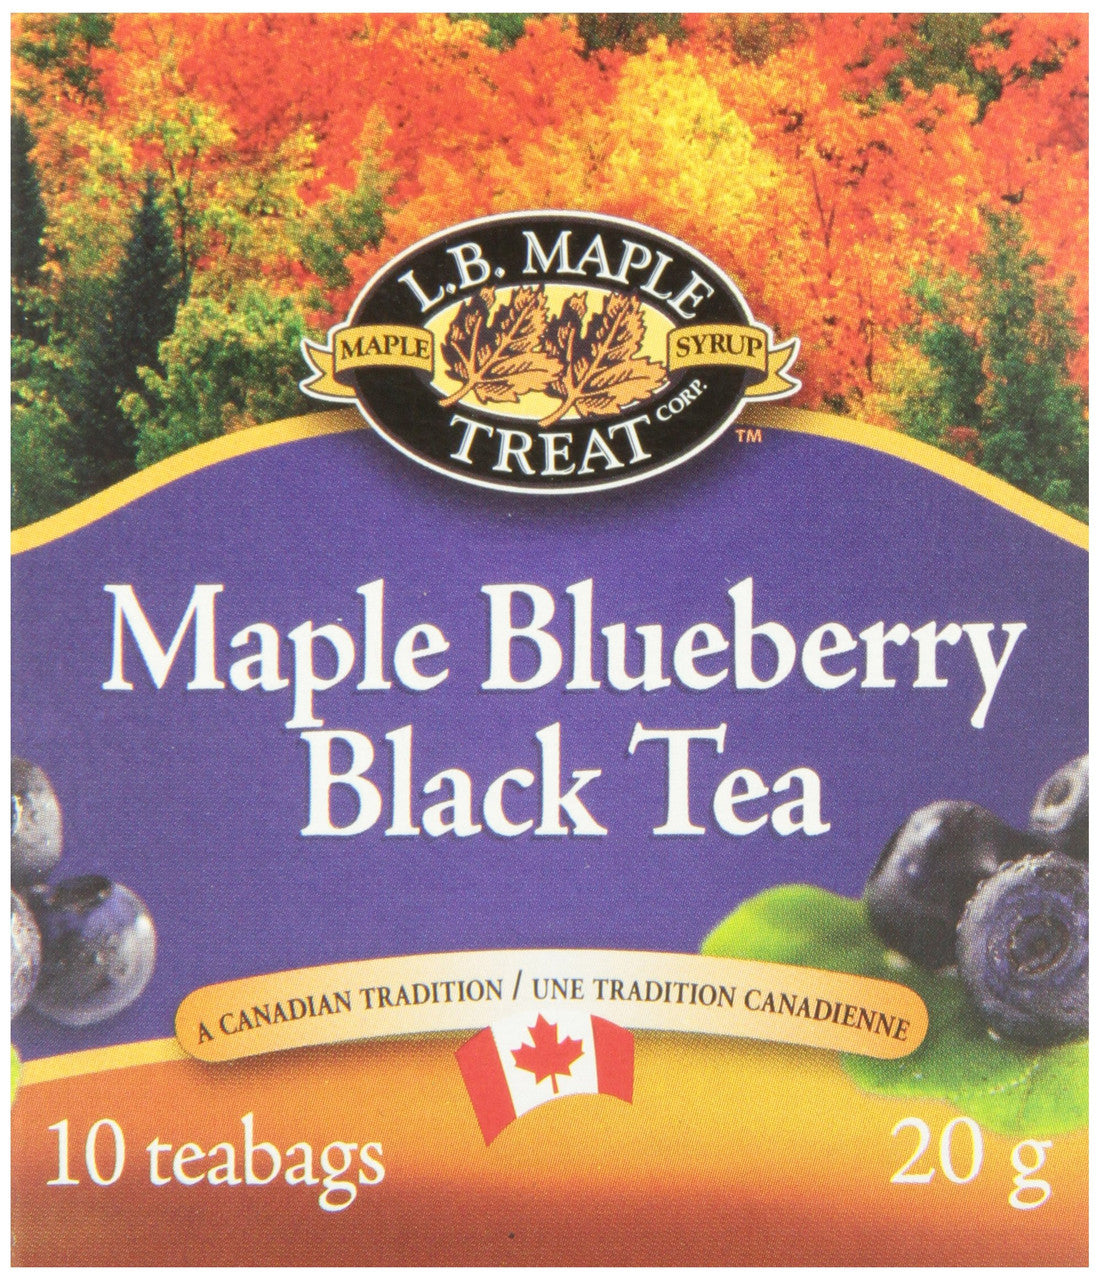 L.B. MAPLE TREAT, Maple Blueberry Herbal Tea,  20g, {Imported from Canada}